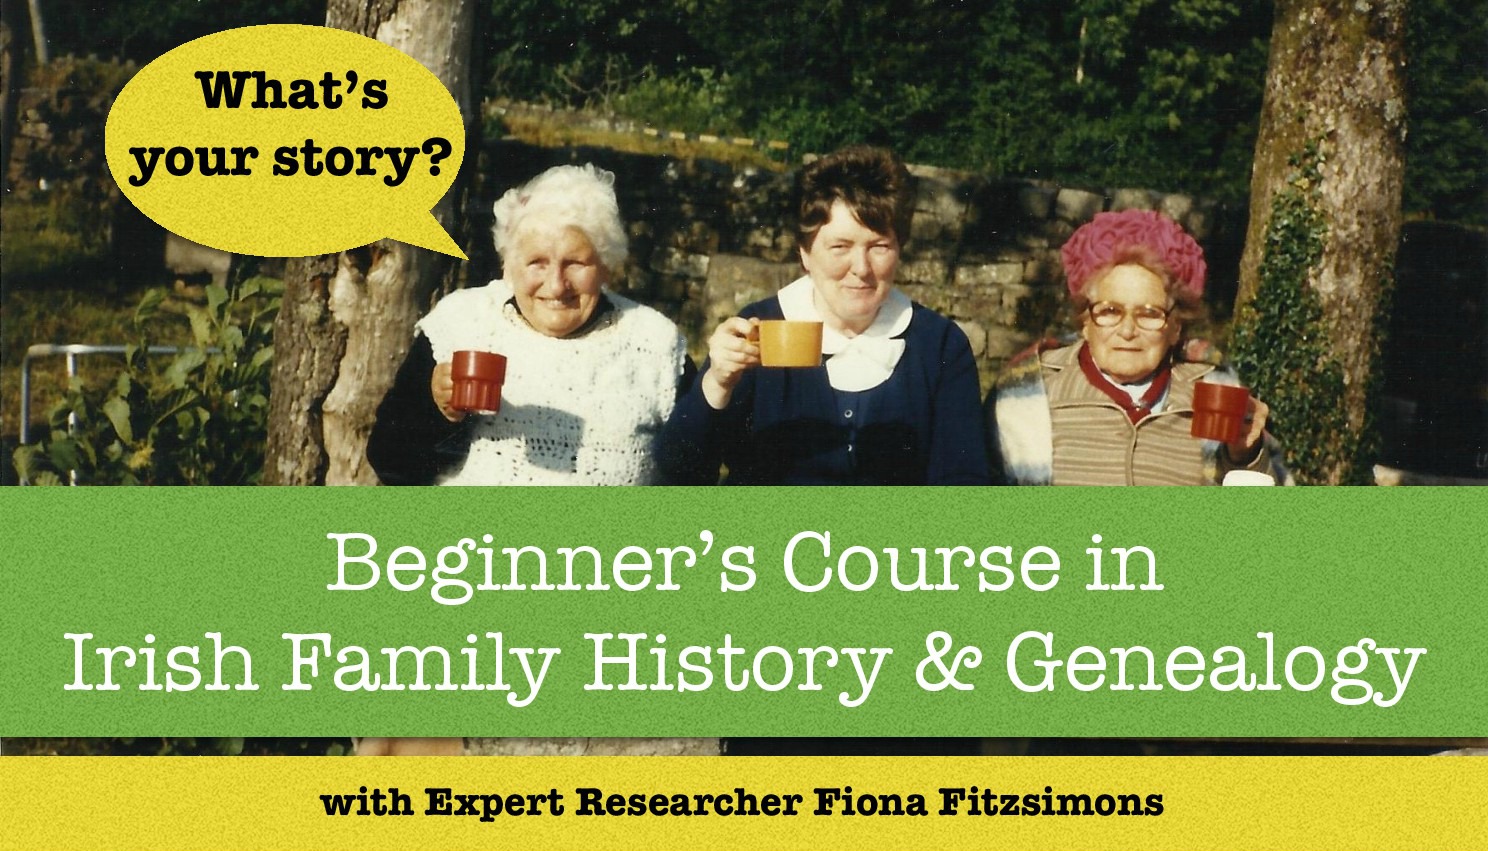 Beginners Course in Irish Family History and Genealogy